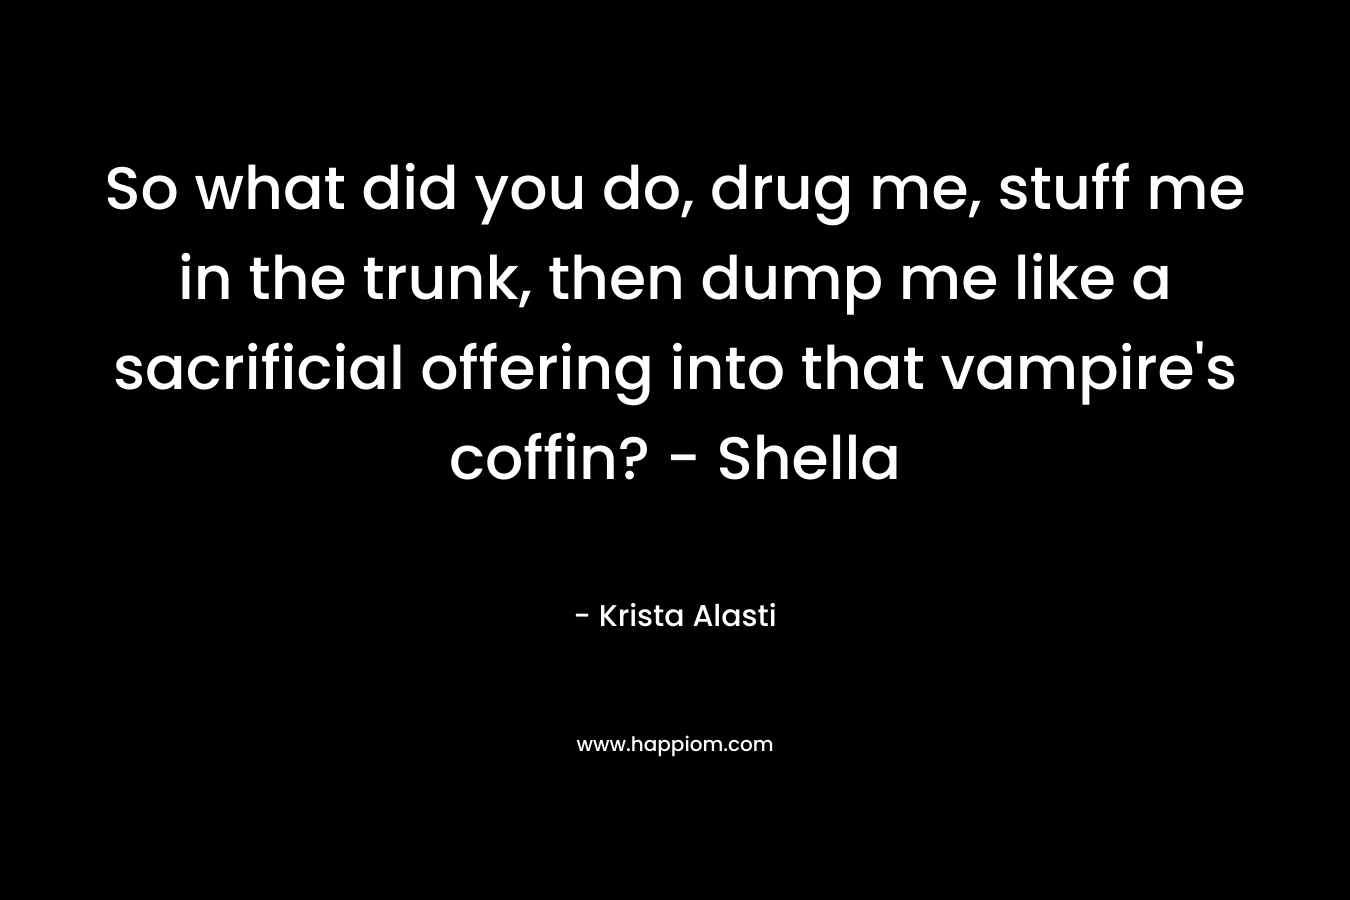 So what did you do, drug me, stuff me in the trunk, then dump me like a sacrificial offering into that vampire's coffin? - Shella